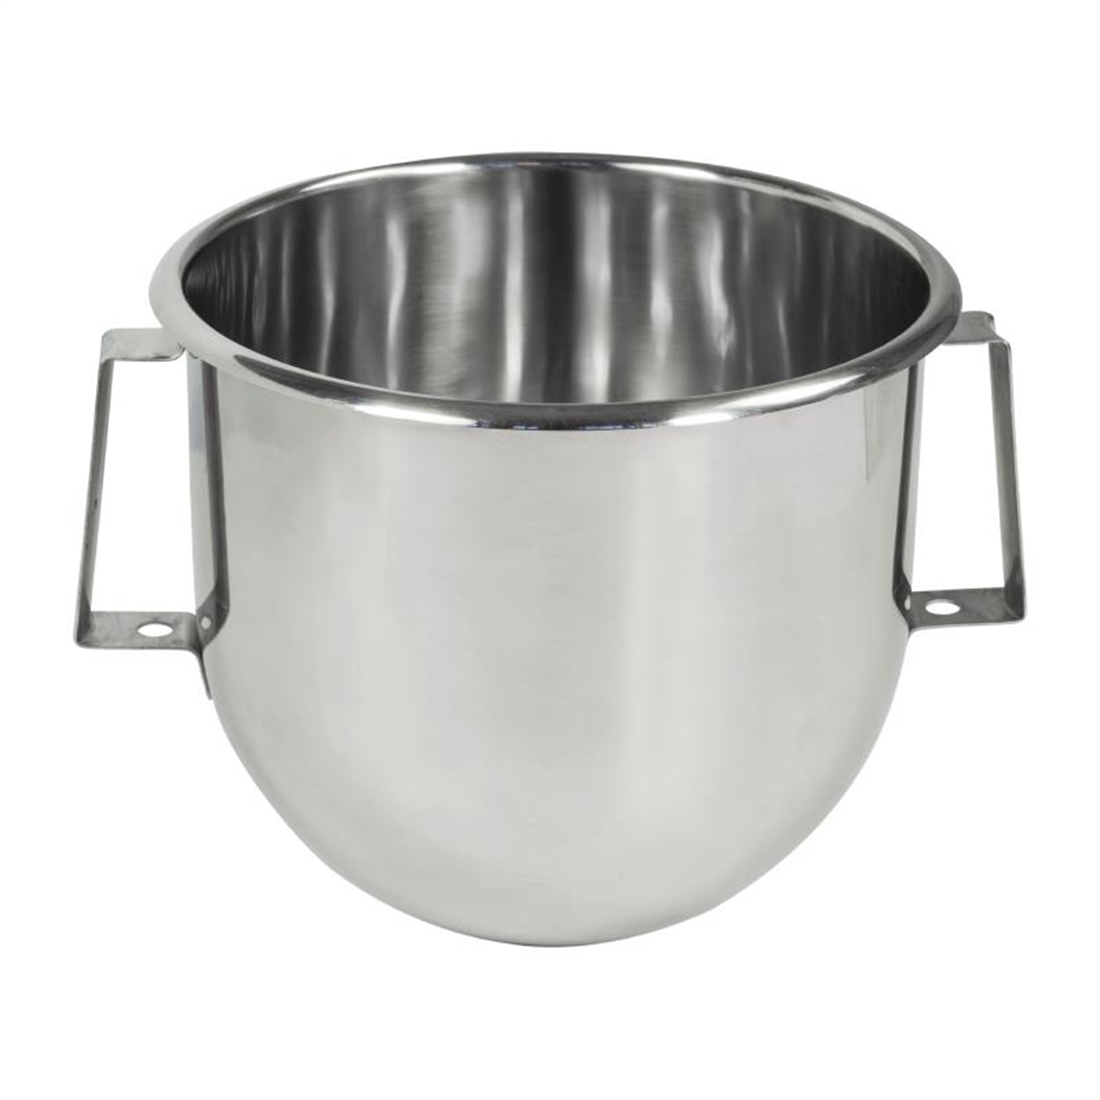 Electrolux EMIX Stainless Steel Bowl 653754